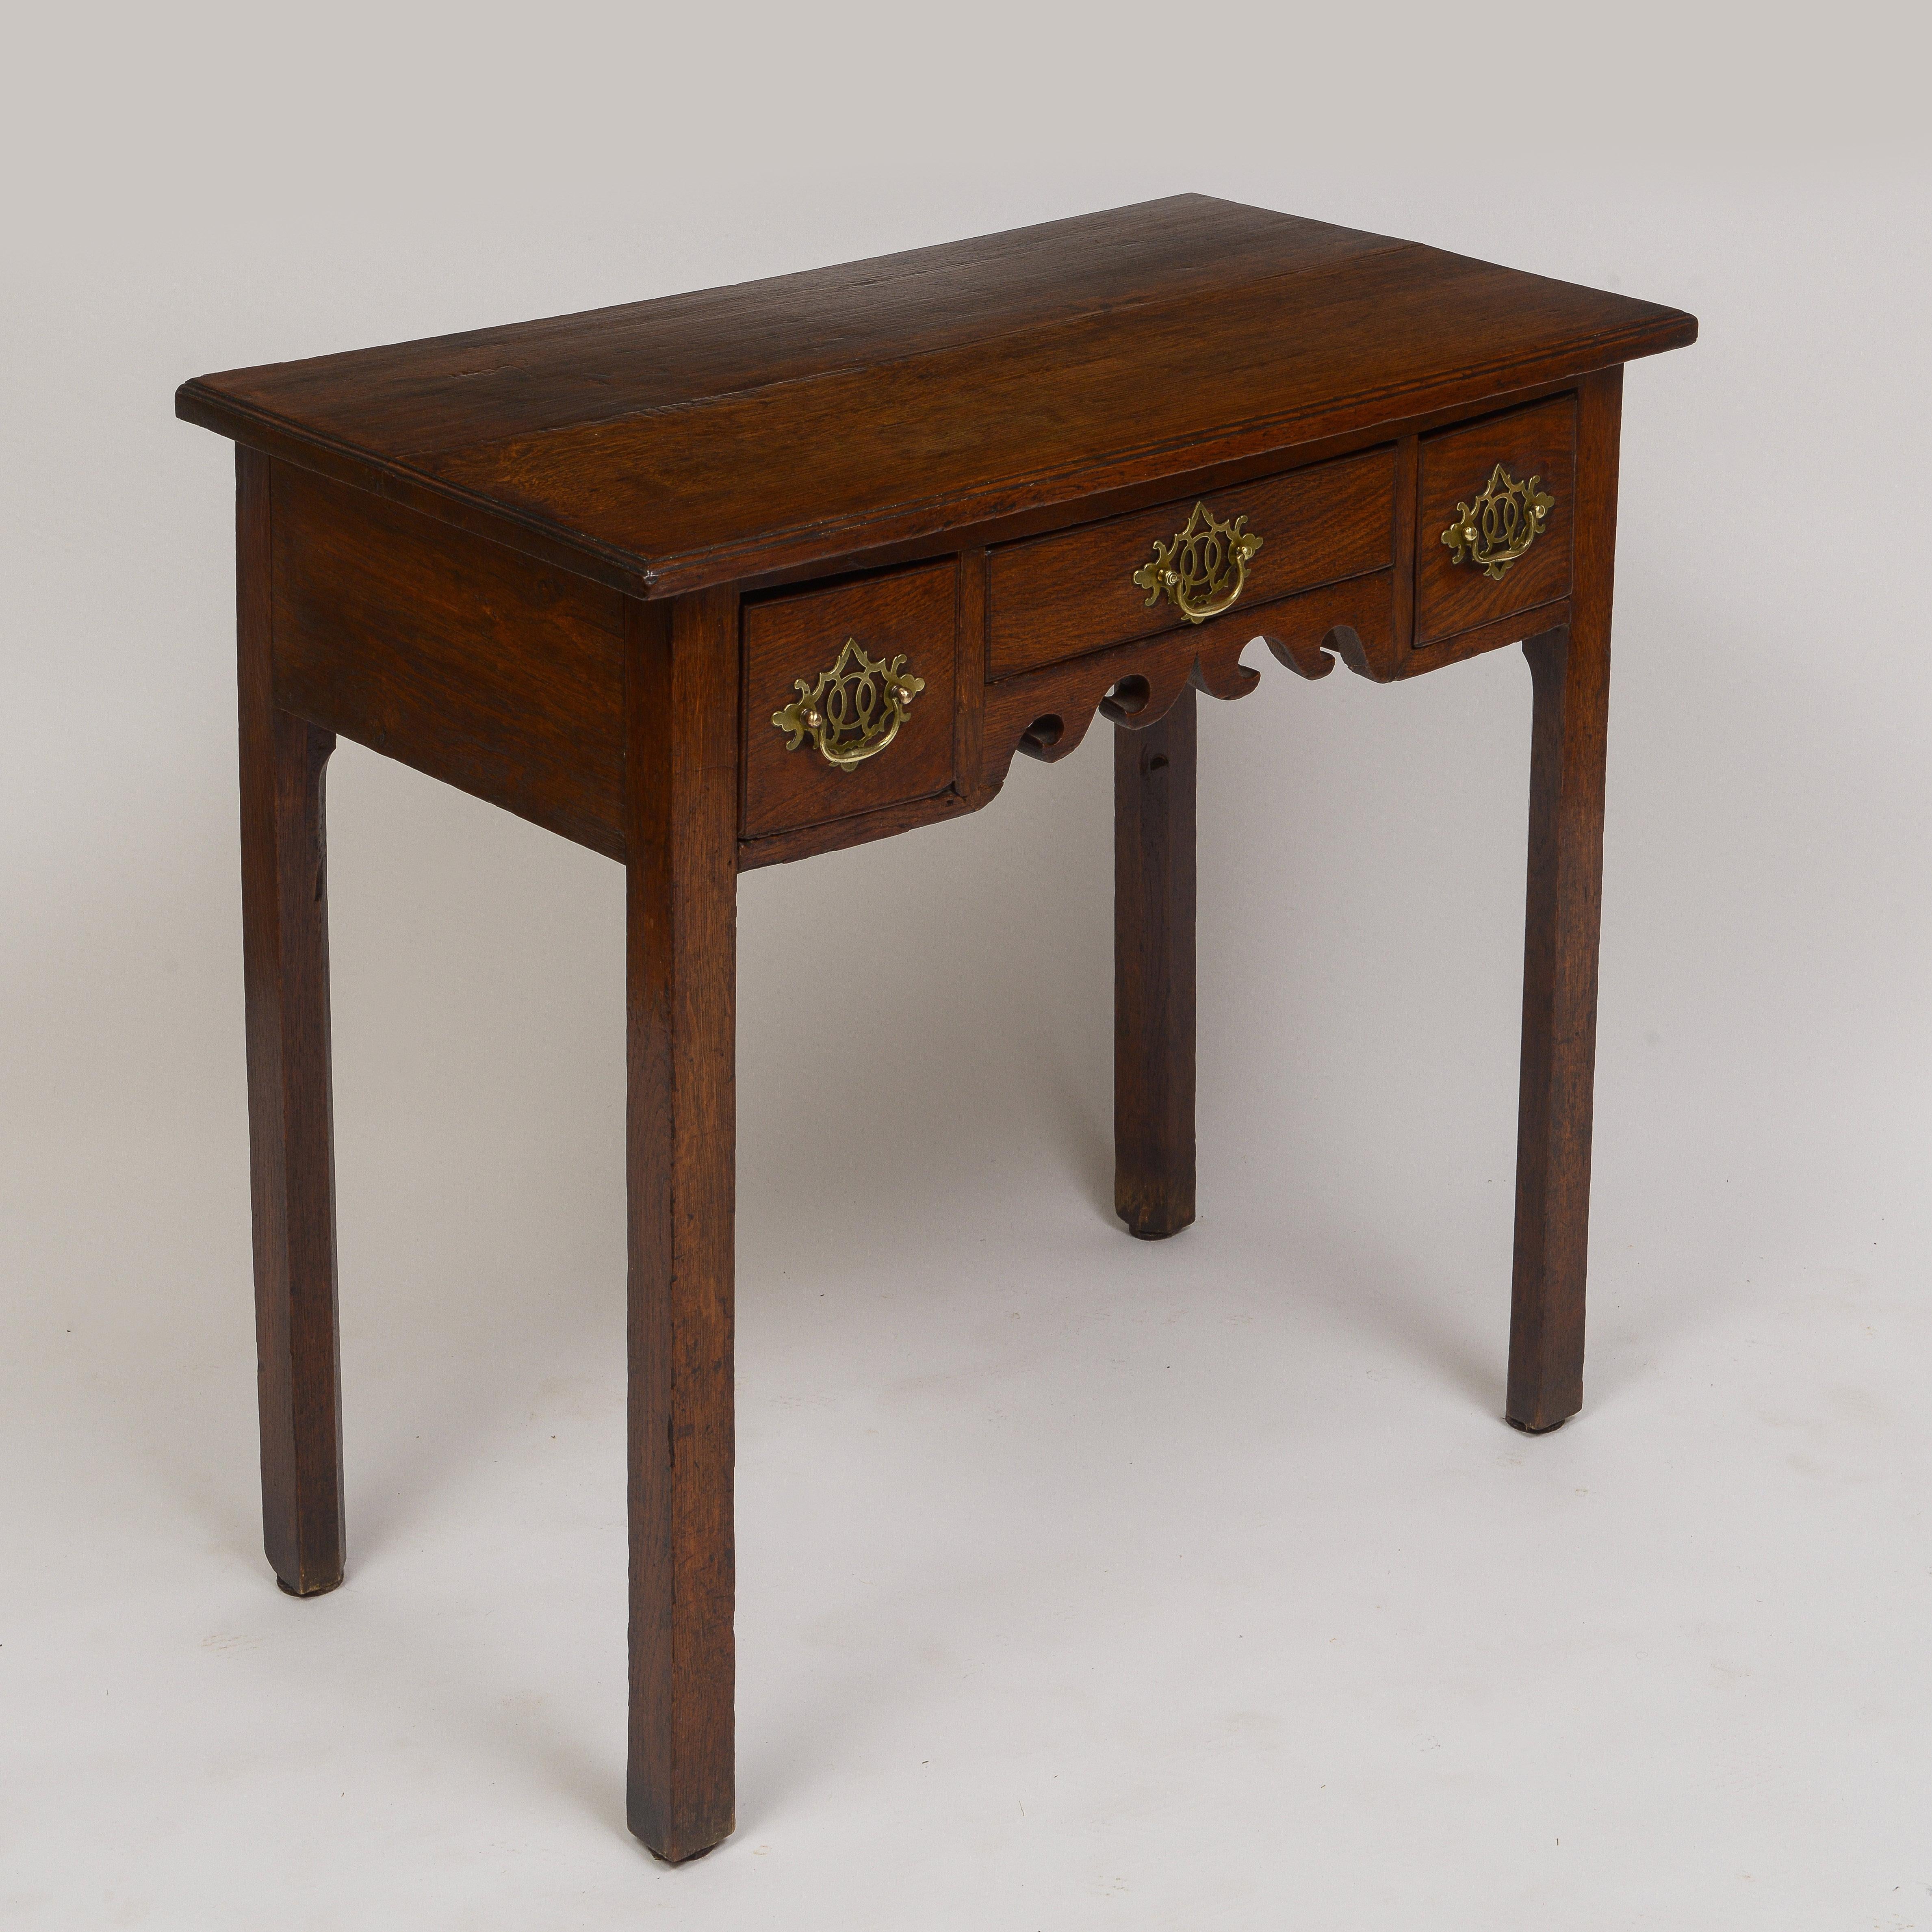 18th Century Georgian Oak Lowboy
Three drawers over decorative carving
Period brass George 2 hardware
Supported on Marlboro legs